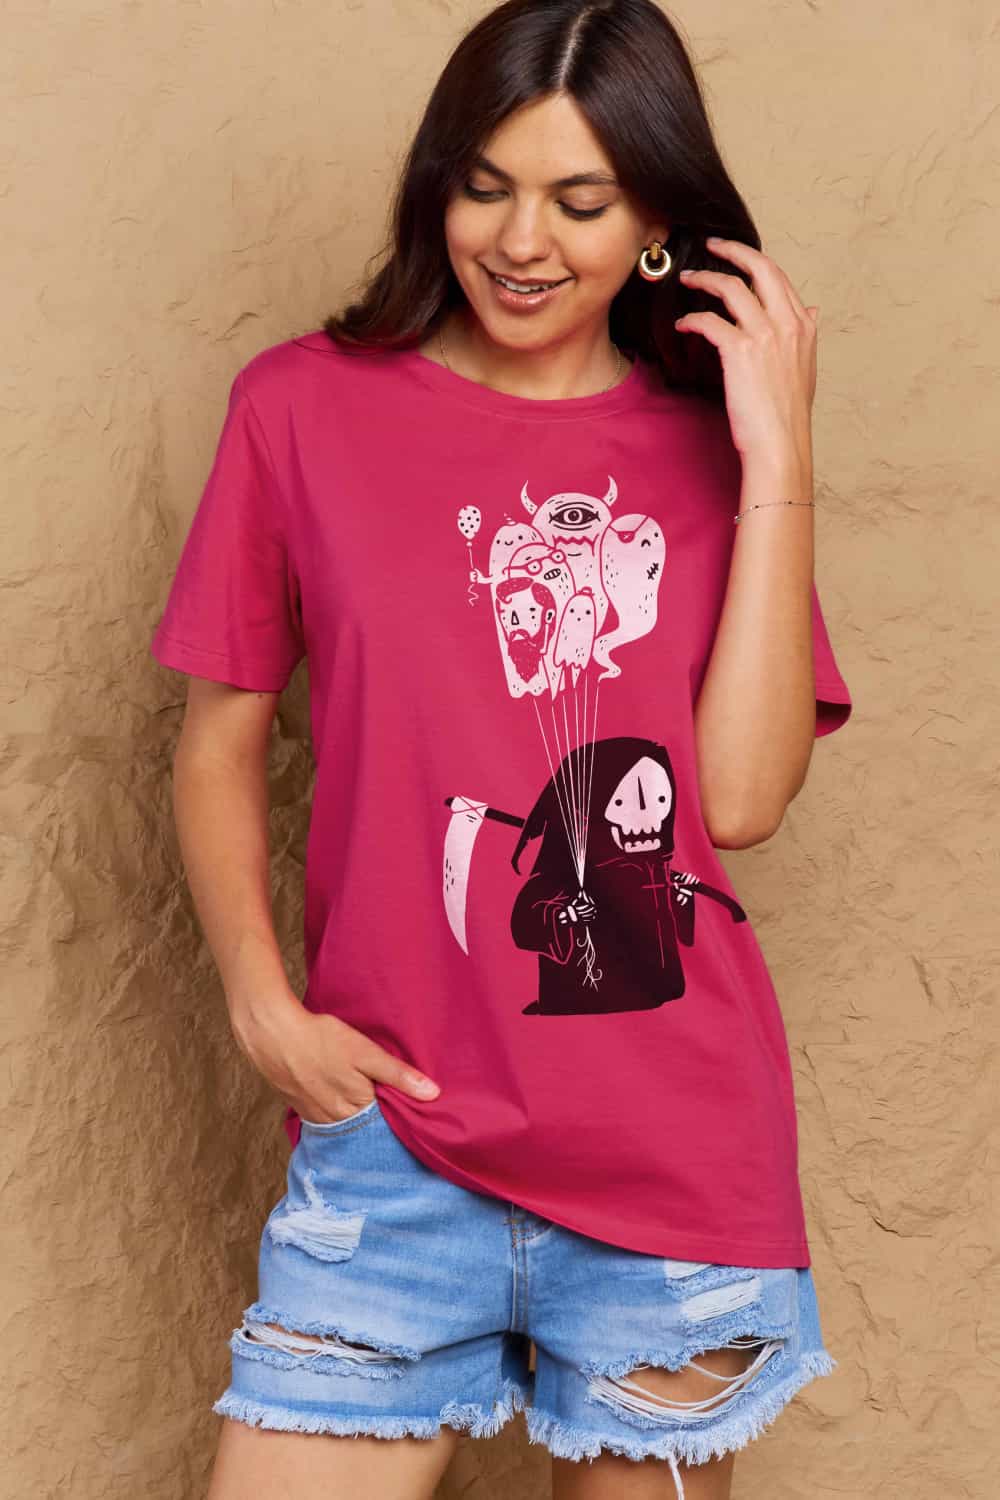 Simply Love Full Size Death Graphic T-Shirt The Stout Steer